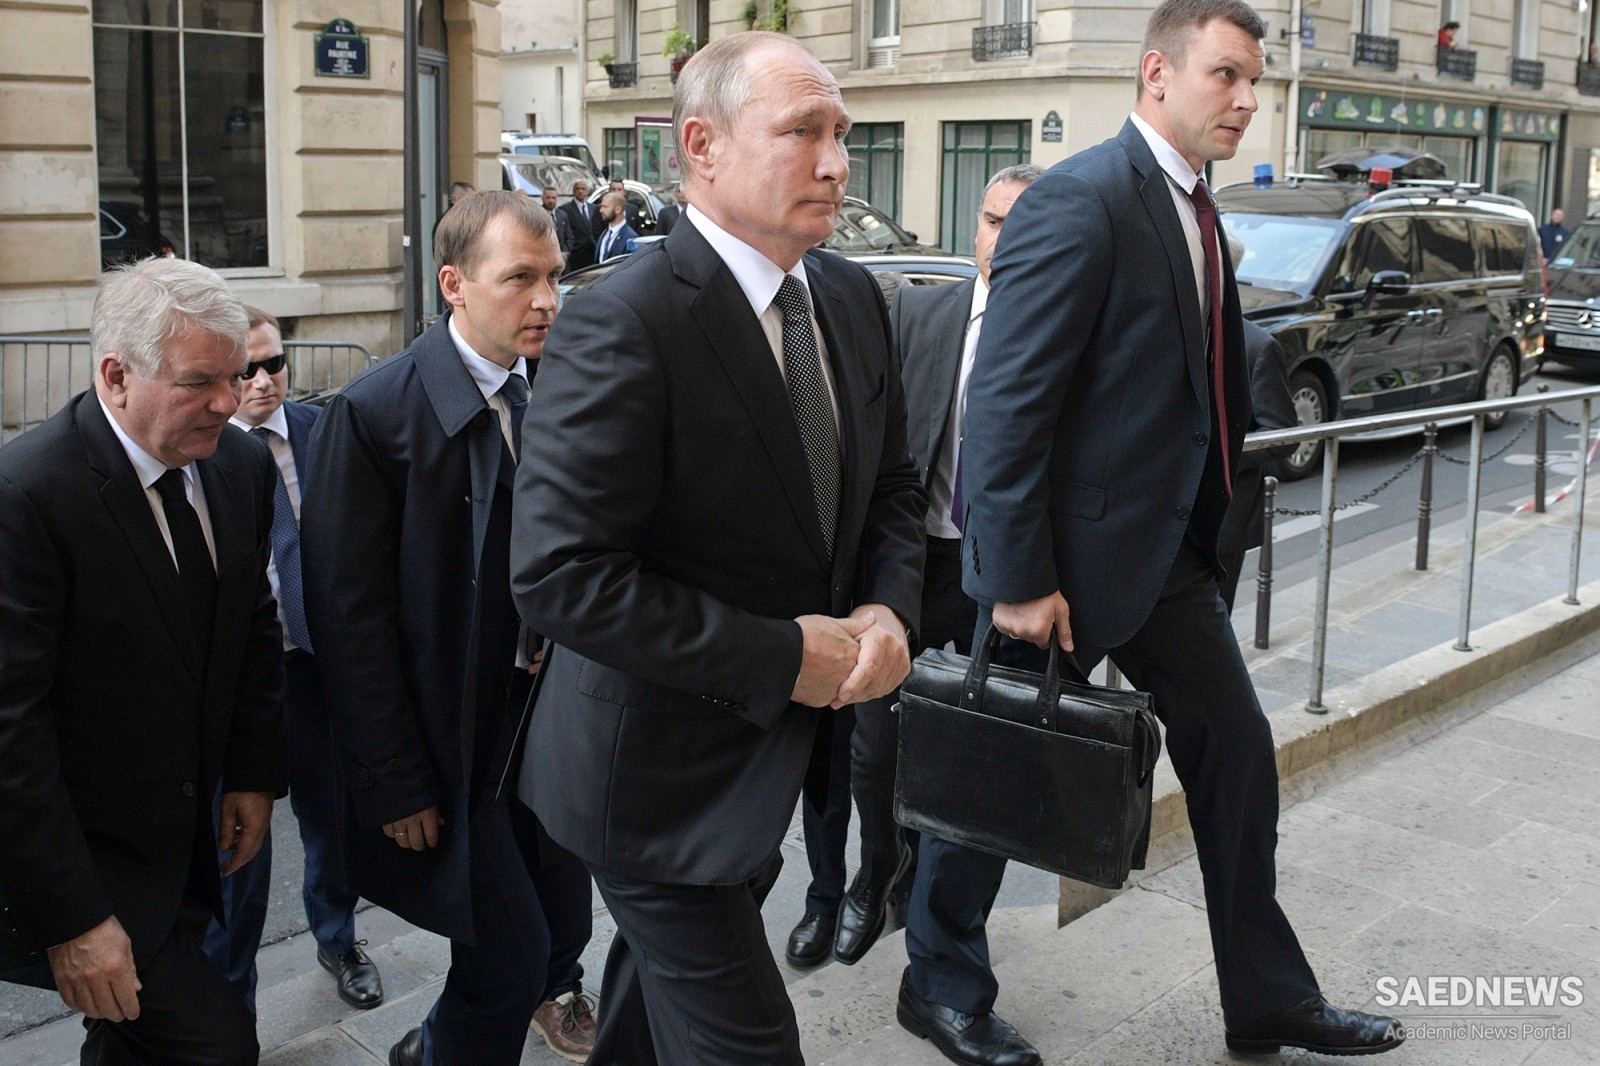 Putin triggers fears of nuclear war by showing up to funeral with secret case